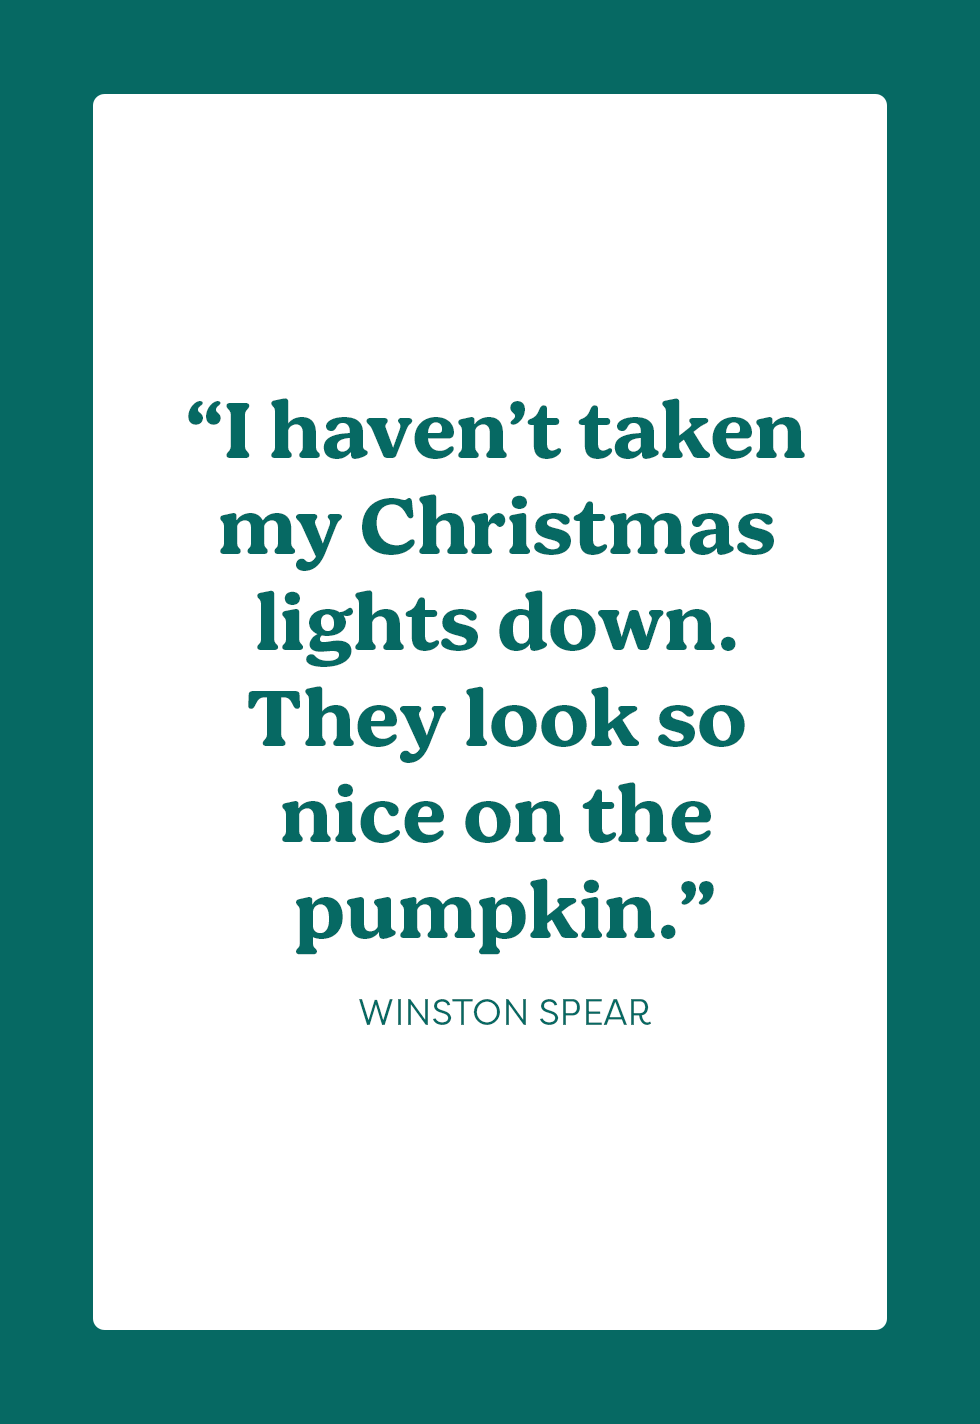 30 Funny Christmas Quotes and Sayings for 2023